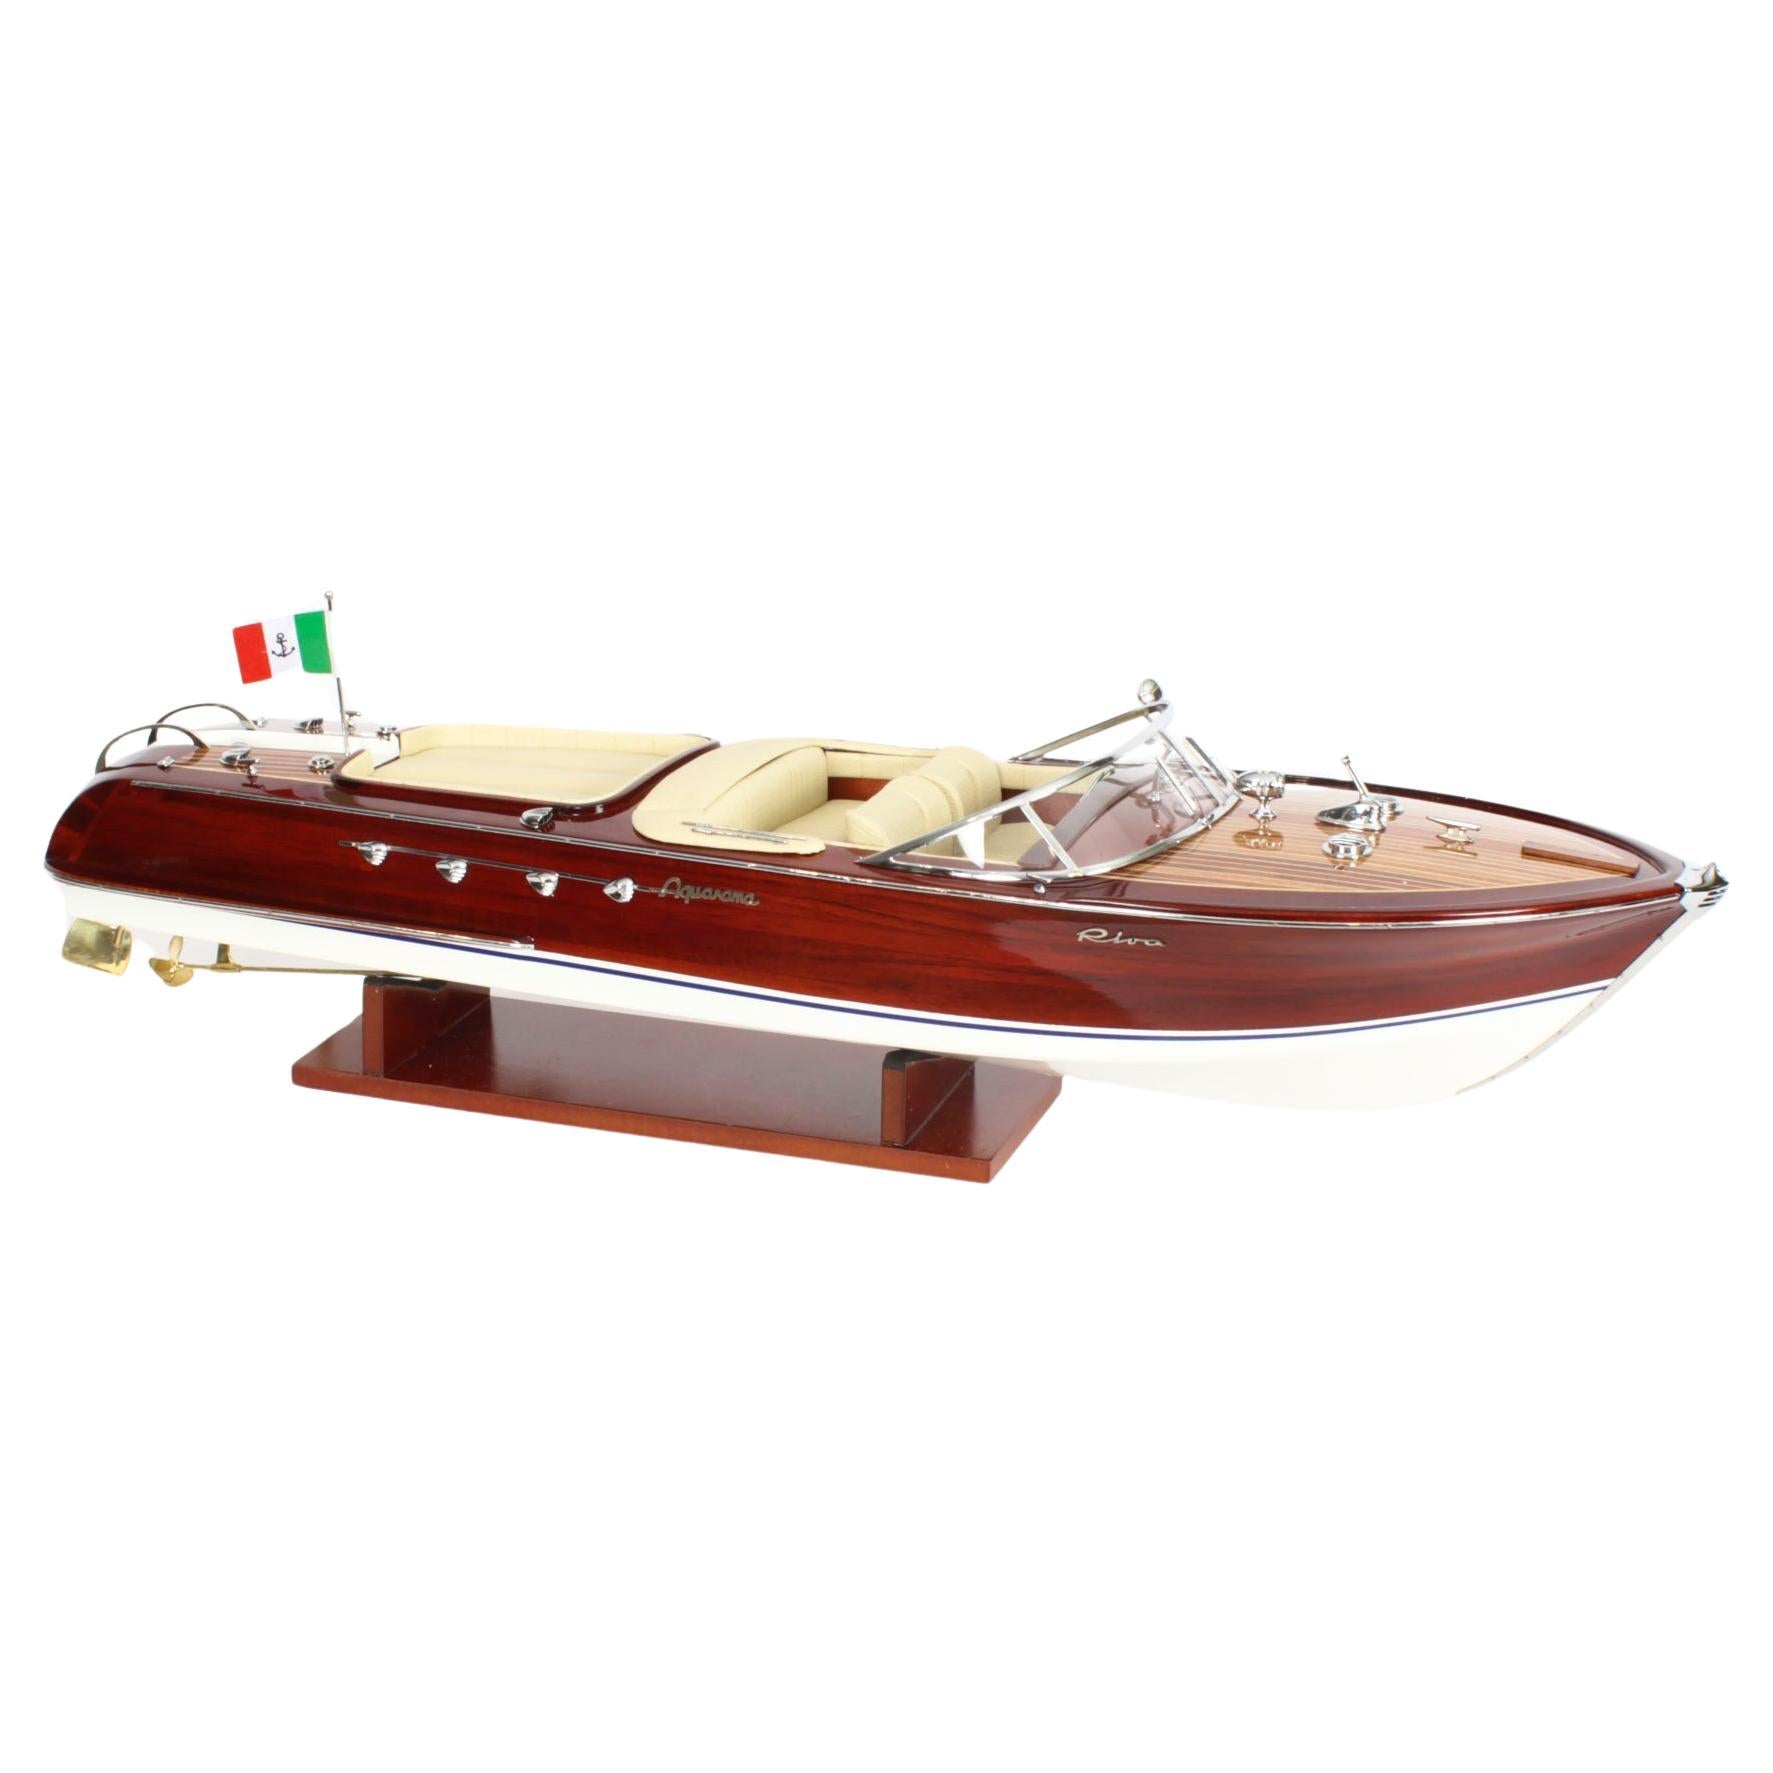 Vintage model of a Riva Aquarama Speedboat 3ft with Cream Interior 20th C For Sale